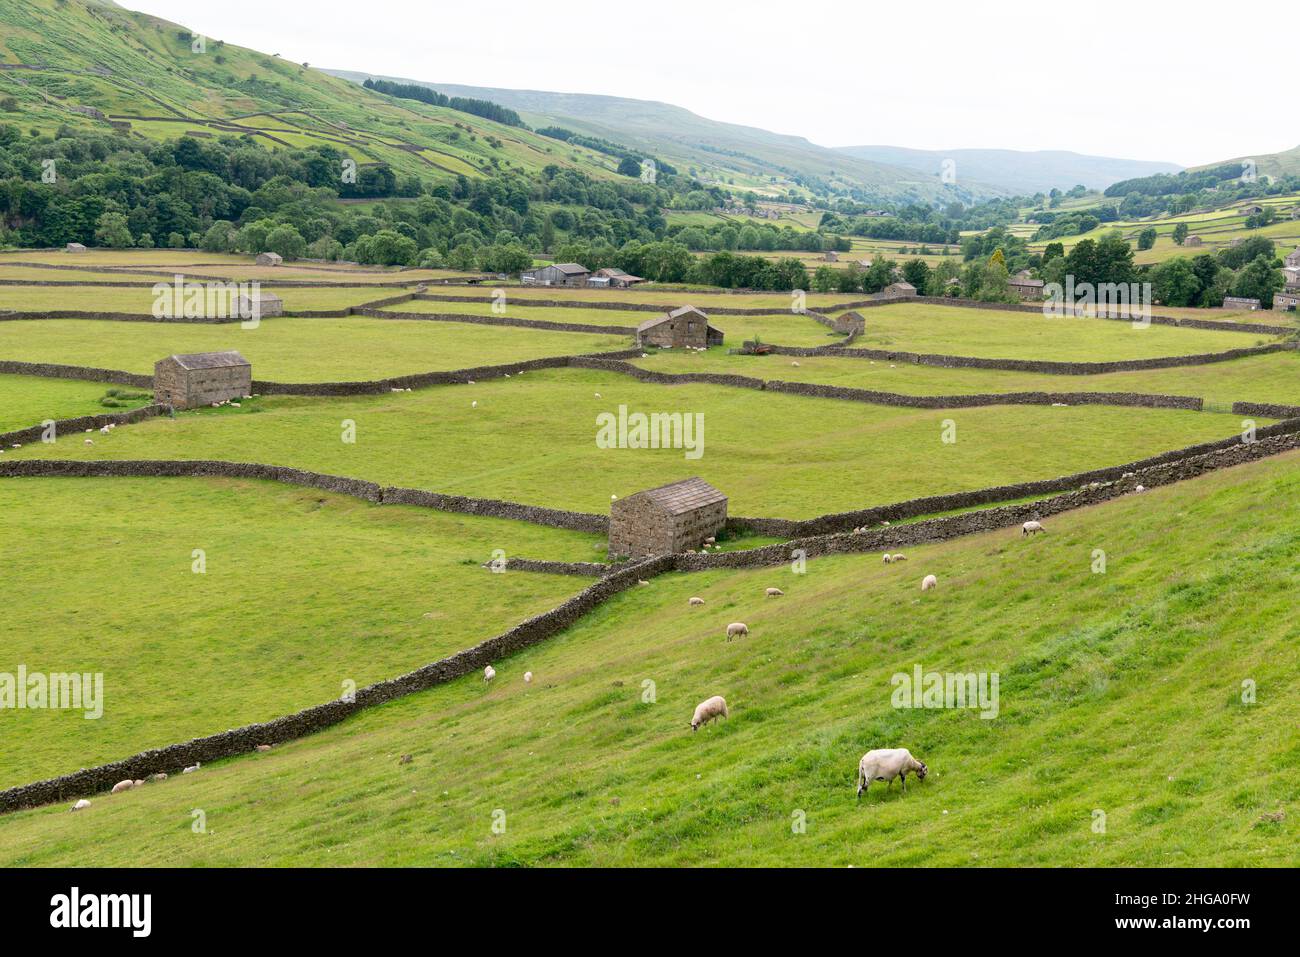 Drystone walls, stone barns and green fields in the Yorkshire Dales, England, UK Stock Photo